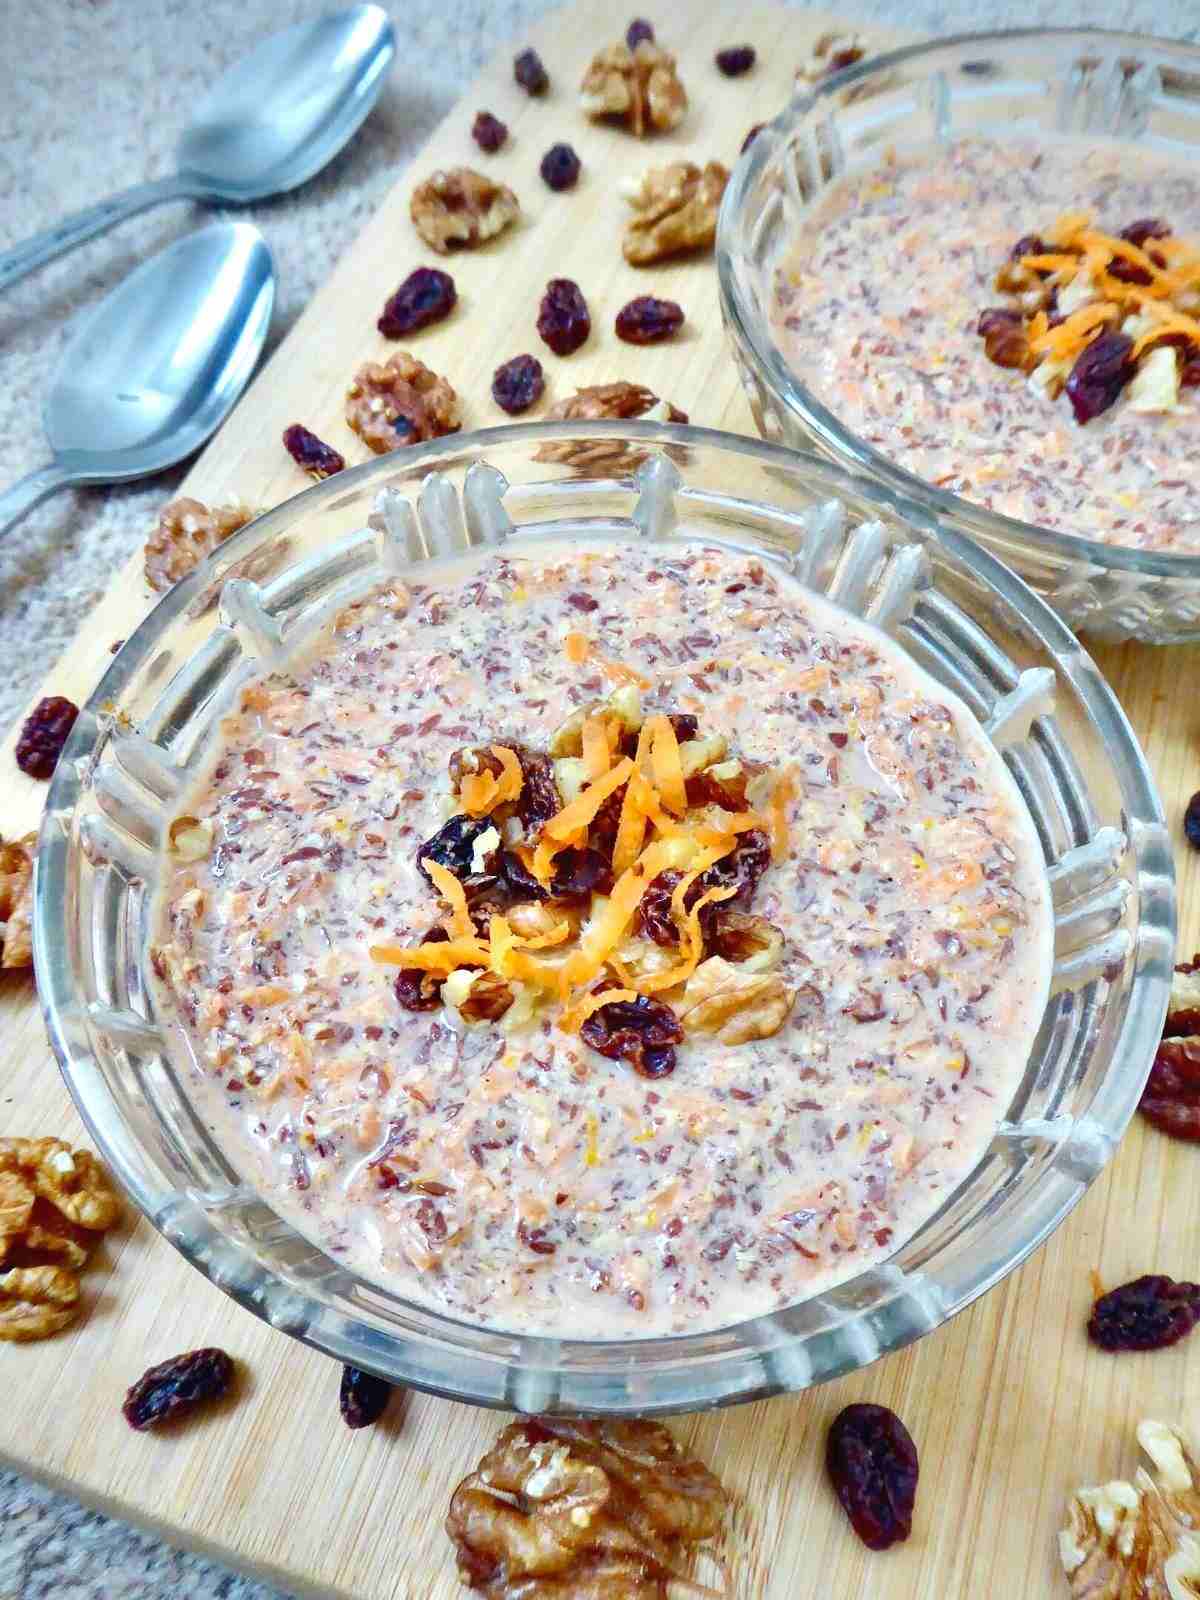 zoomed in on one flaxseed pudding in a glass bowl with 2 spoons and other serving bowl in the background